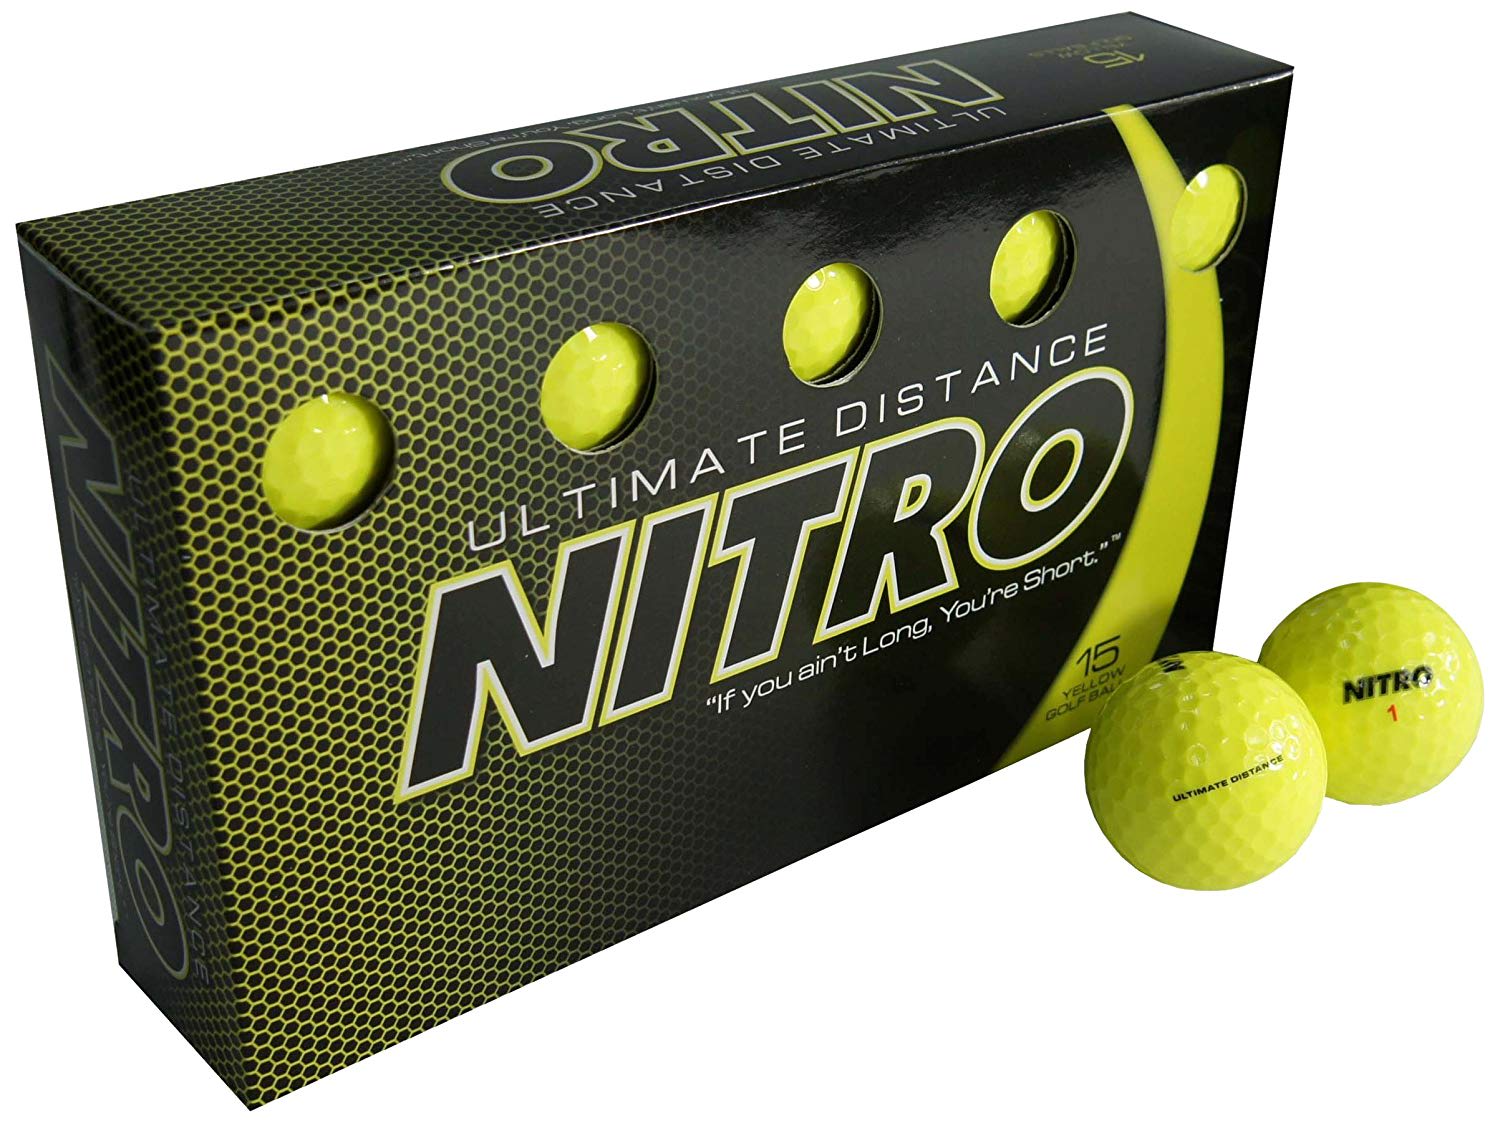 Nitro Ultimate Distance Golf Balls Review: USGA Approved Long Distance High-Quality Golf Balls